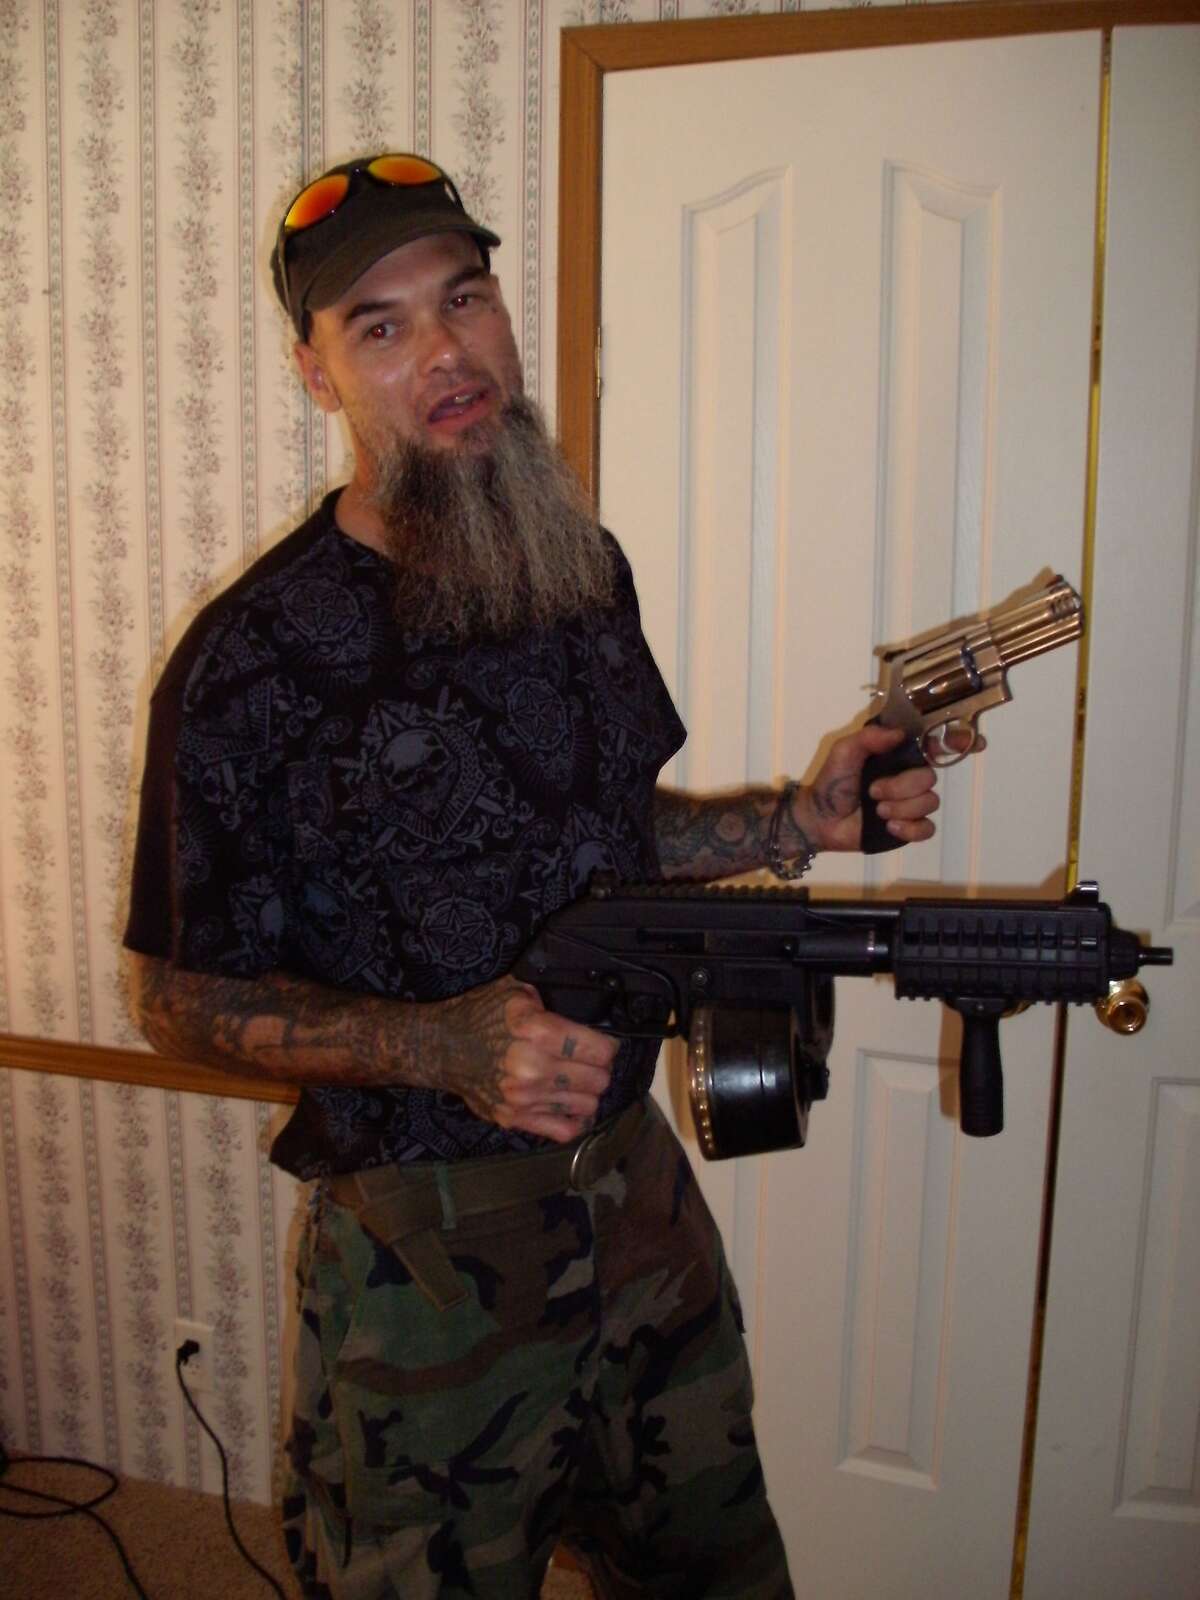 Steven Walter Cooke, a general in the Aryan Brotherhood of Texas. The undated photos are courtesy of the U.S. Department of Justice, and have never before been published. They were found on a phone that was captured by law-enforcement authorities and used to prosecute Cooke, a Tomball resident.